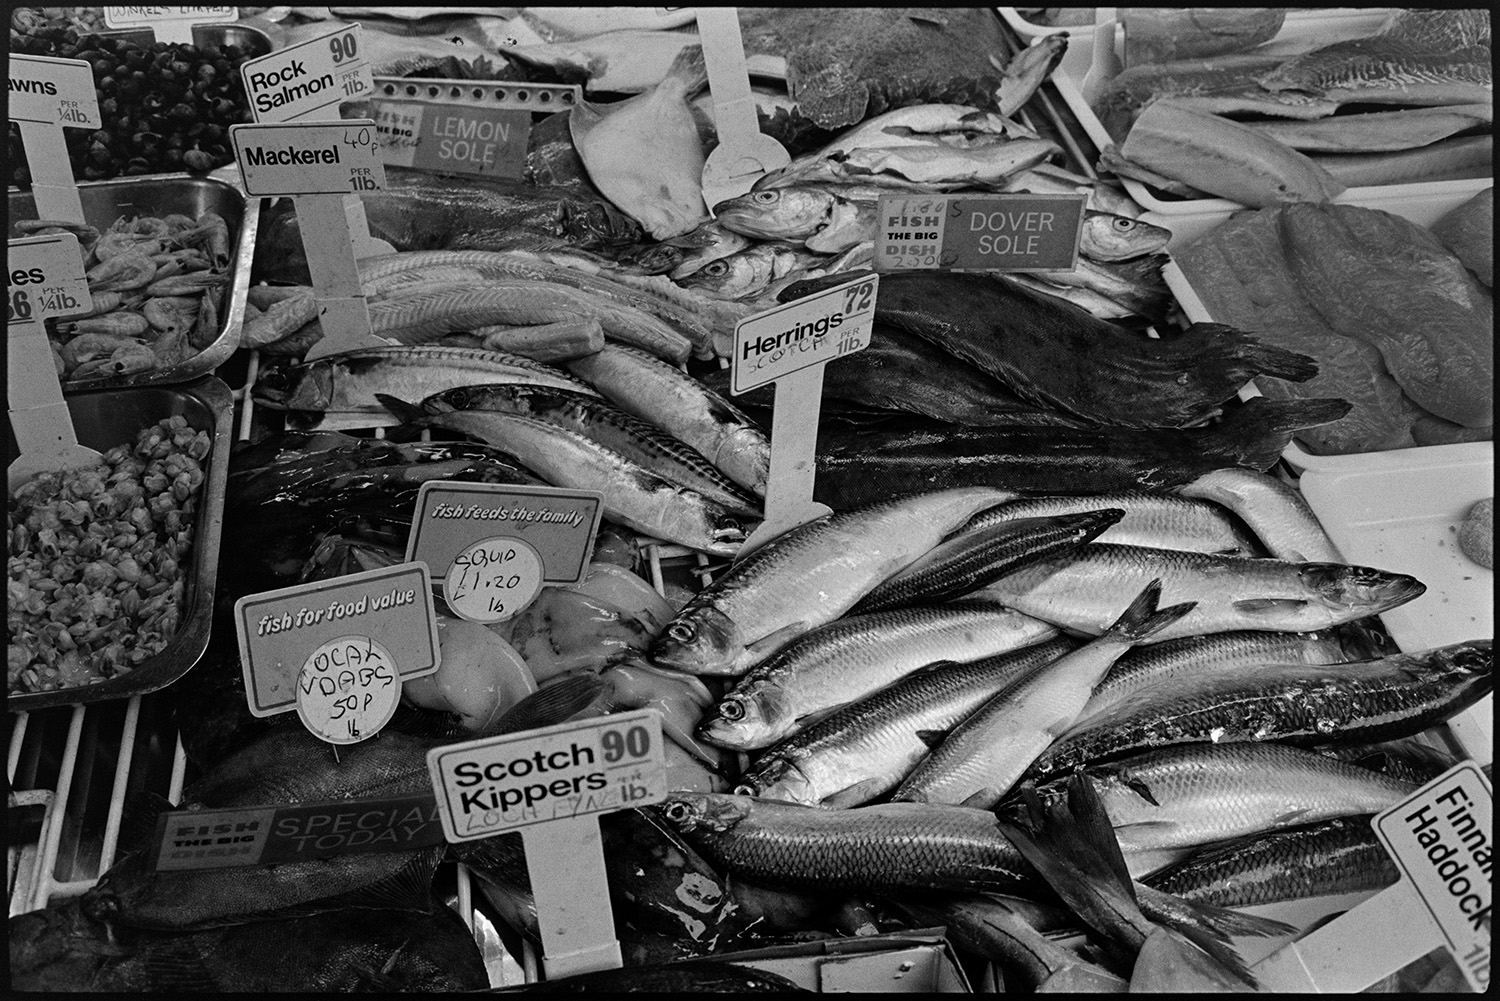 Fish and eggs on display.
[A large range of fresh fish for sale at Barnstaple Pannier Market, including Herrings, Dover sole and Mackerel.]